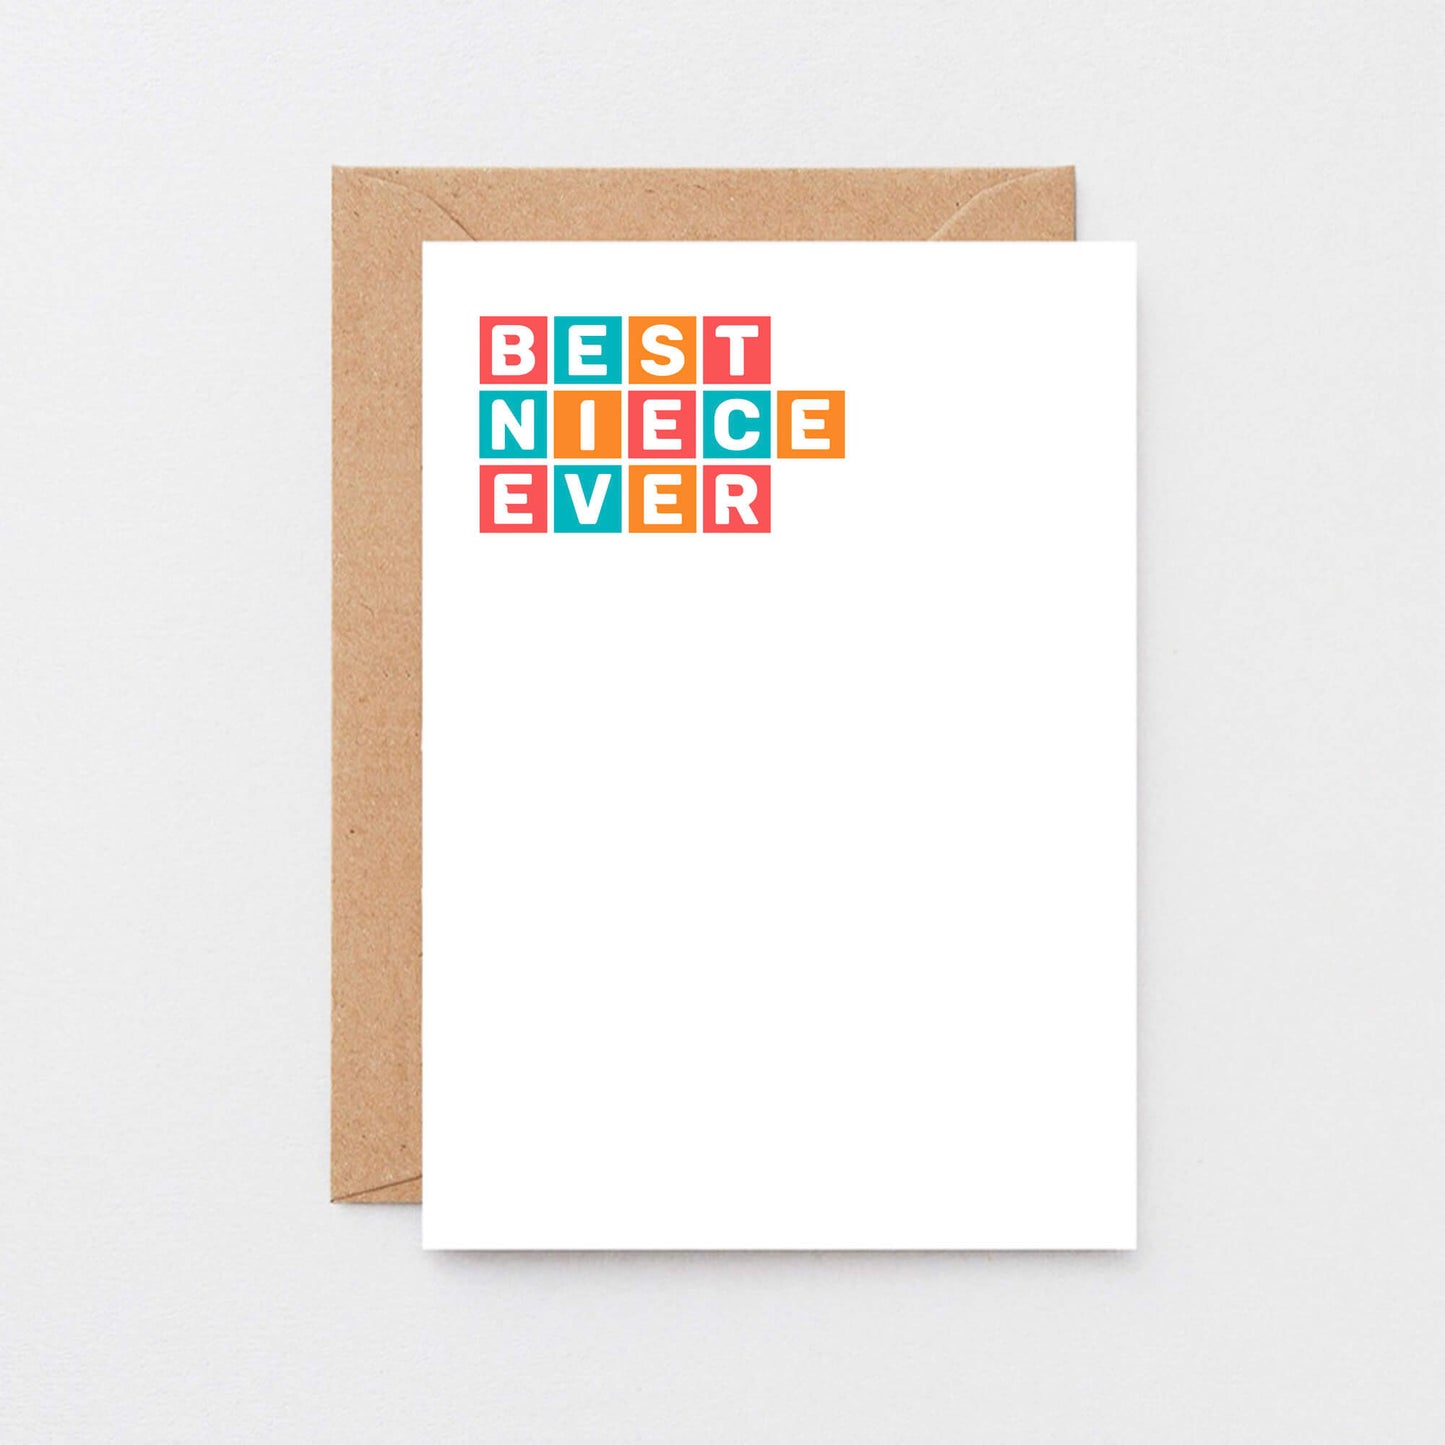 Best Niece Ever Card by SixElevenCreations. Product Code SE0364A6